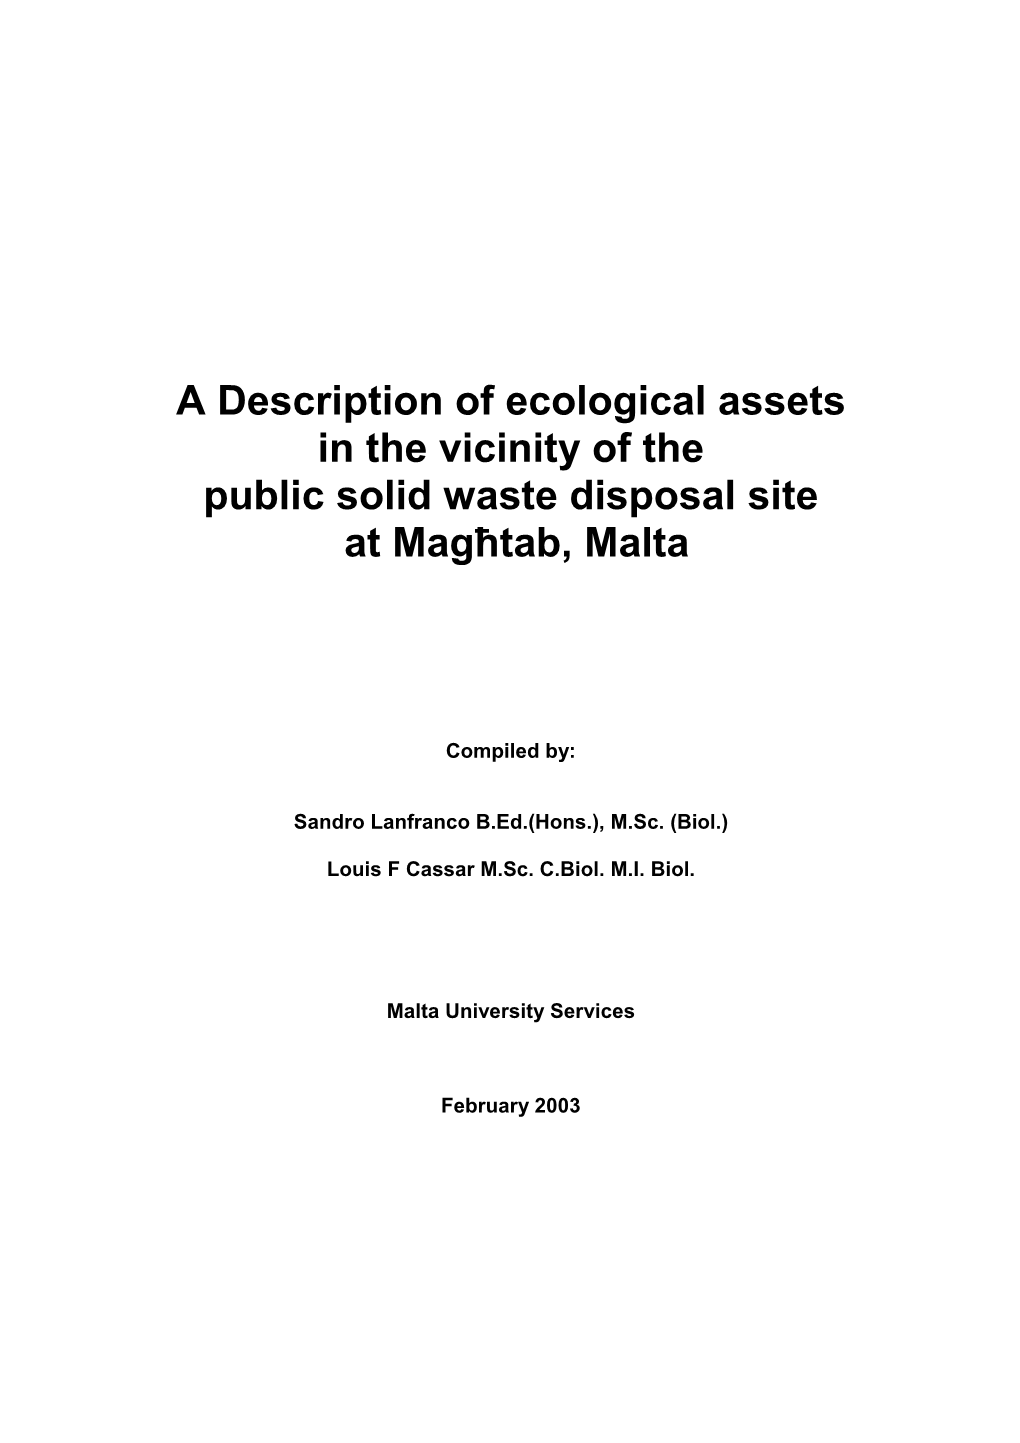 Description of Ecological Assets in the Vicinity of the Public Solid Waste Disposal Site at Magħtab, Malta